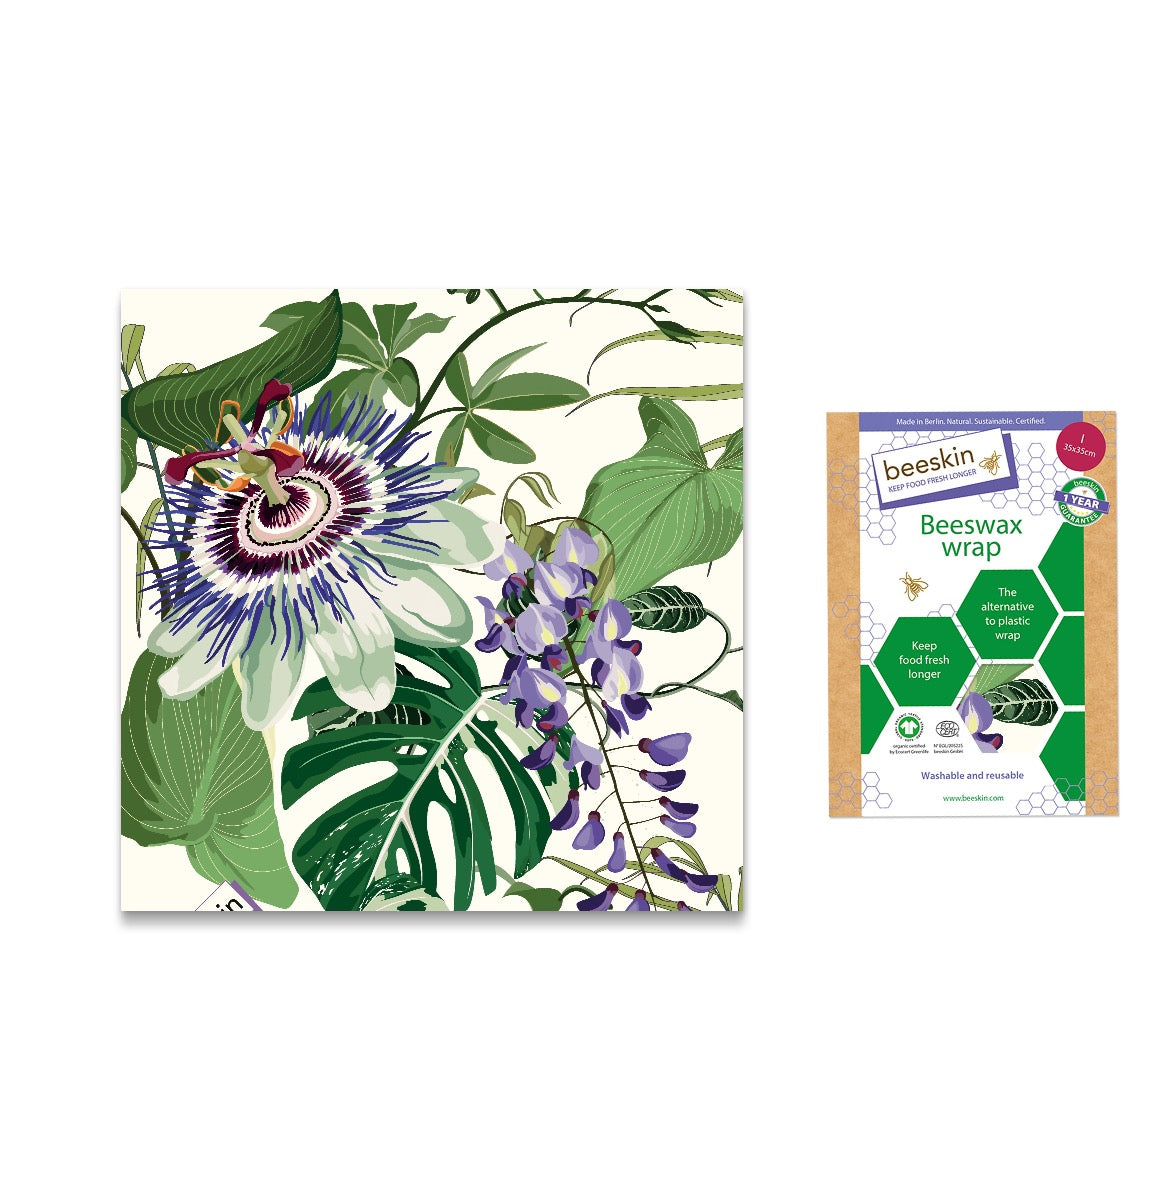 beeskin beeswax wrap passionflower next to packaging